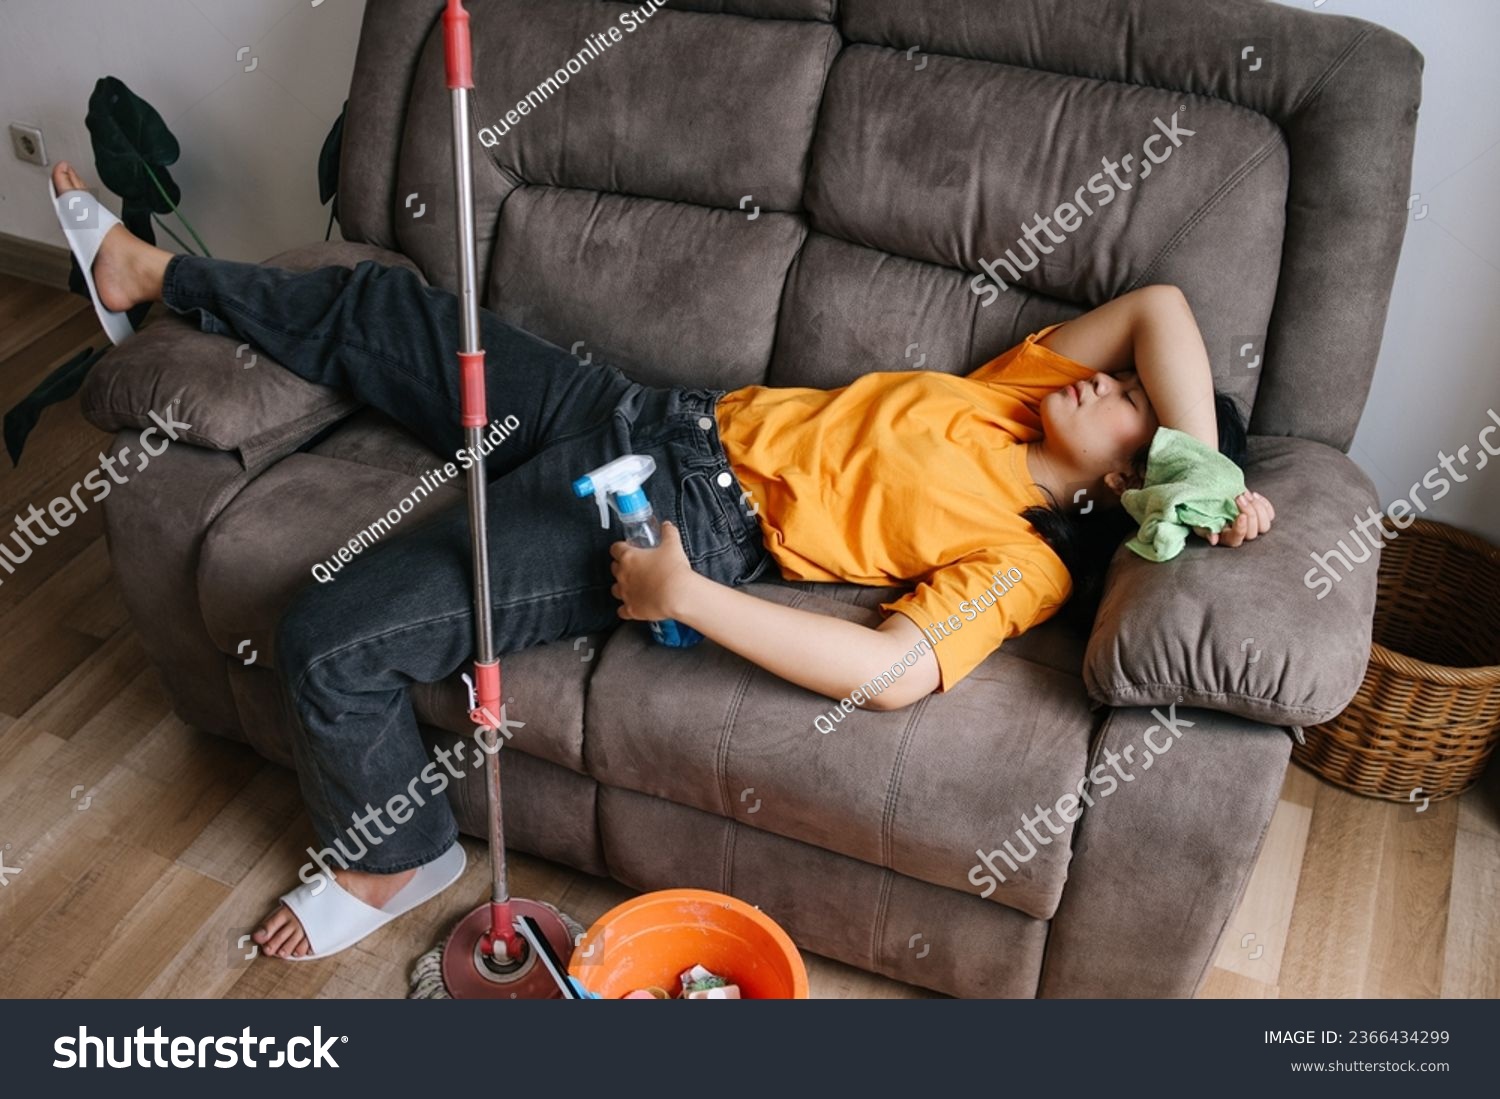 Top view of exhausted woman sleeping on couch during cleaning house #2366434299